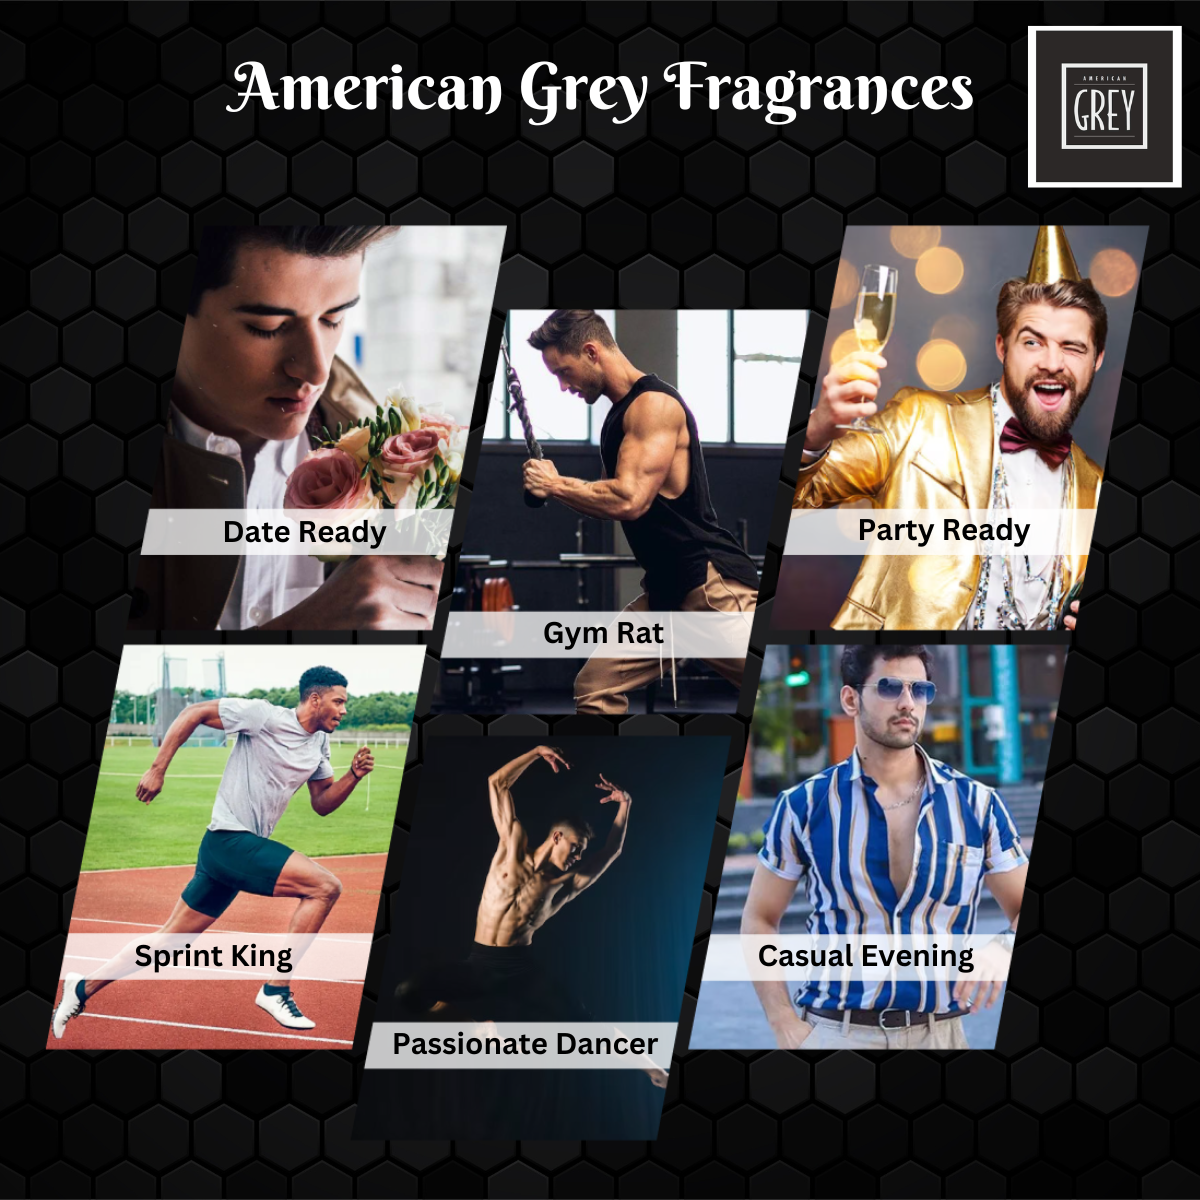 be date ready with american grey perfume spray, be party ready with american grey perfume spray, grooming routine for men, best party deo, best gym deo, long lasting deo for casual evenings, can I use deodorant anytime, when can u wear a deodorant, can I wear a deo in morning, best time to apply deo, best time to apply american grey deo